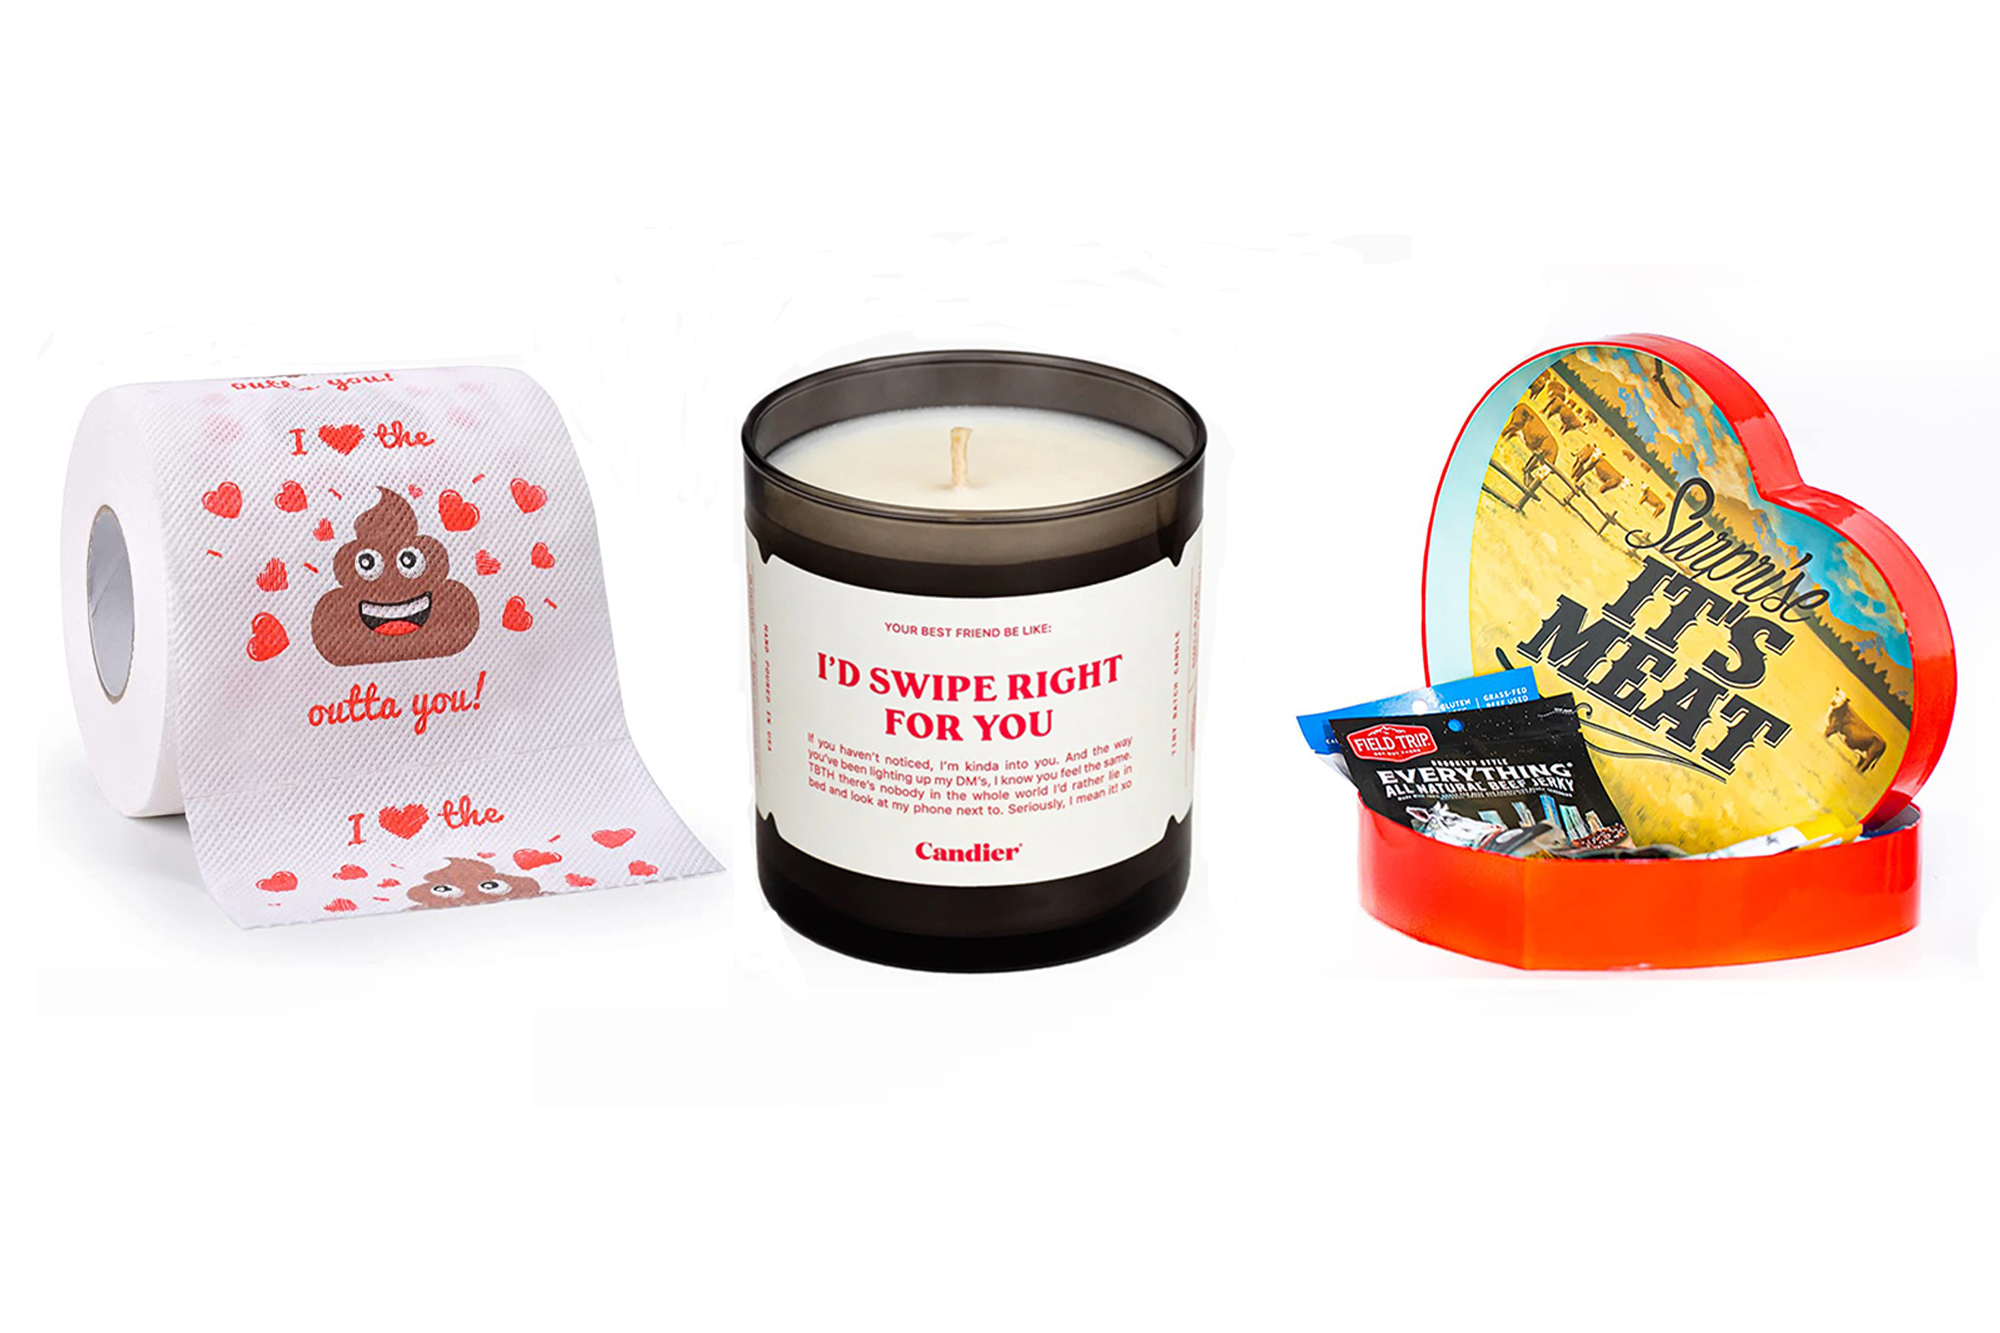 Valentine's Gifts to Give Your Partner, Based on Their Love Language